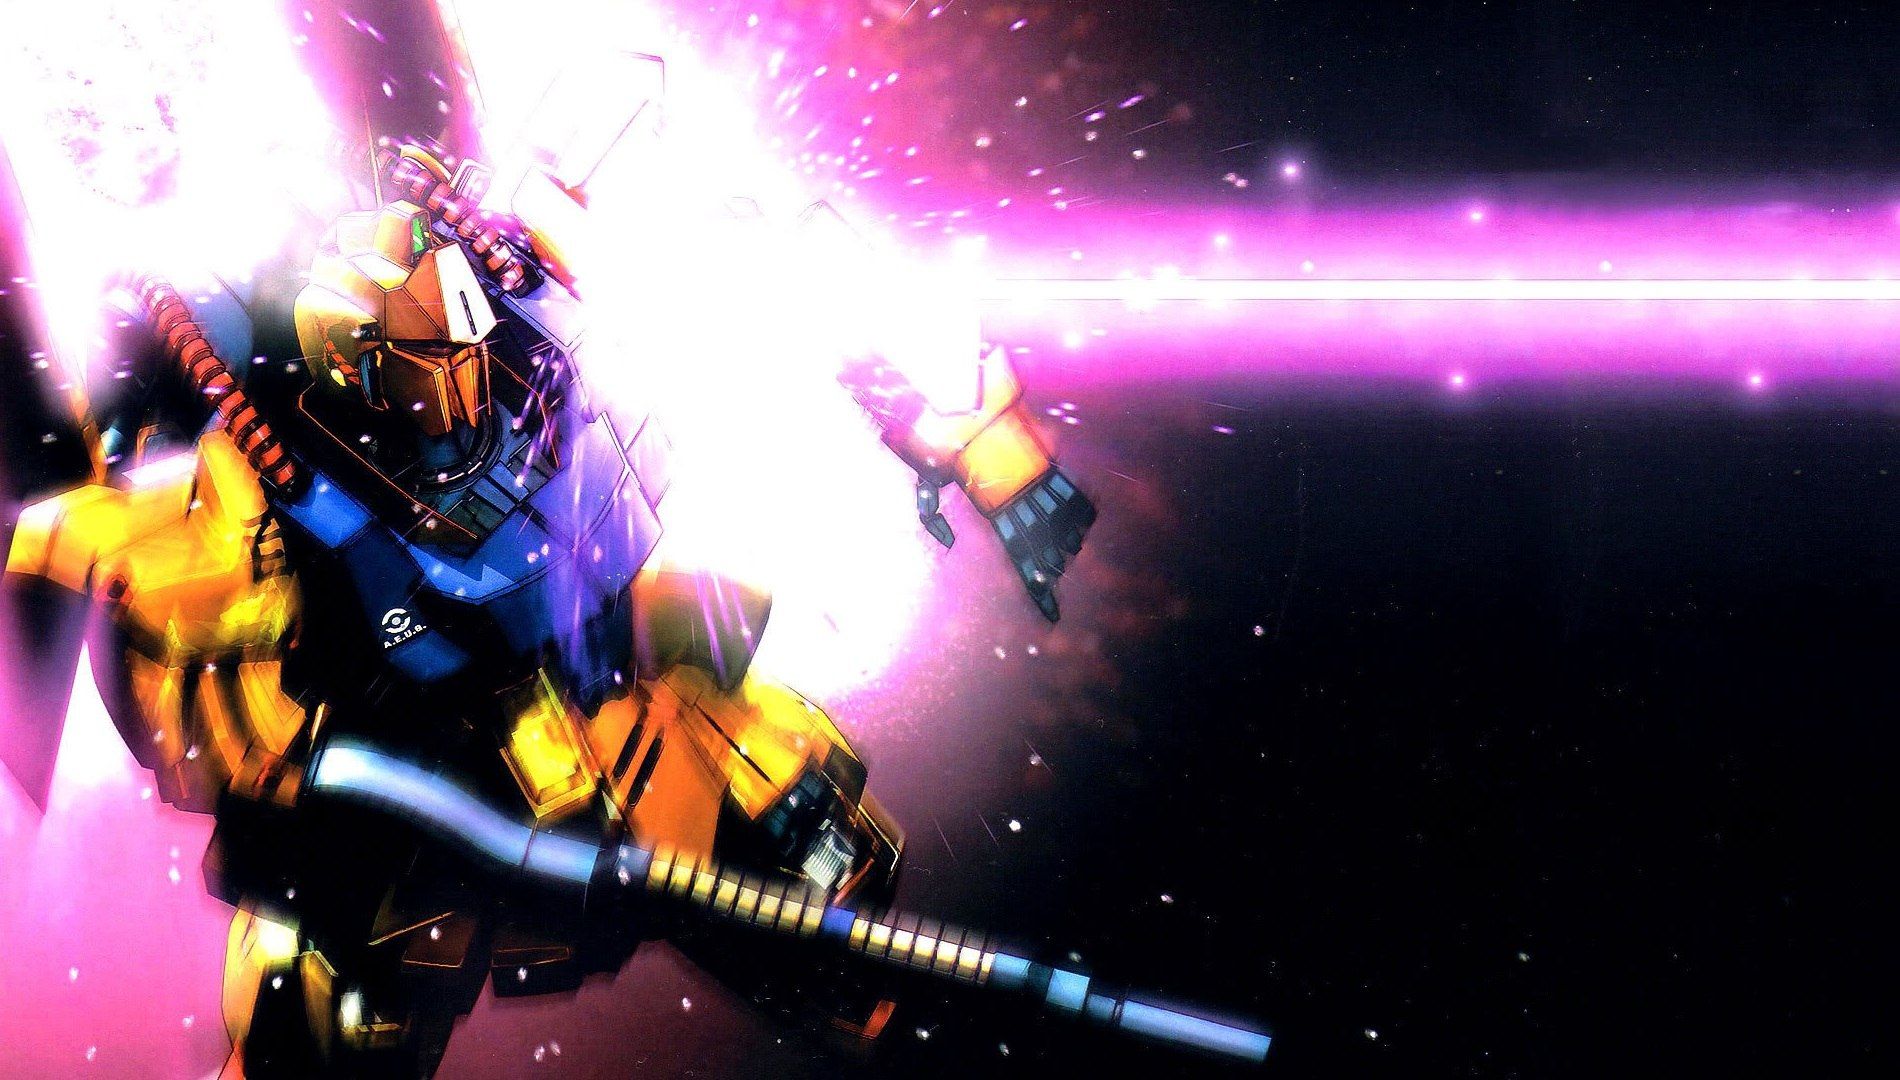 Gundam wallpaper 1900x1080 - - High Quality and other